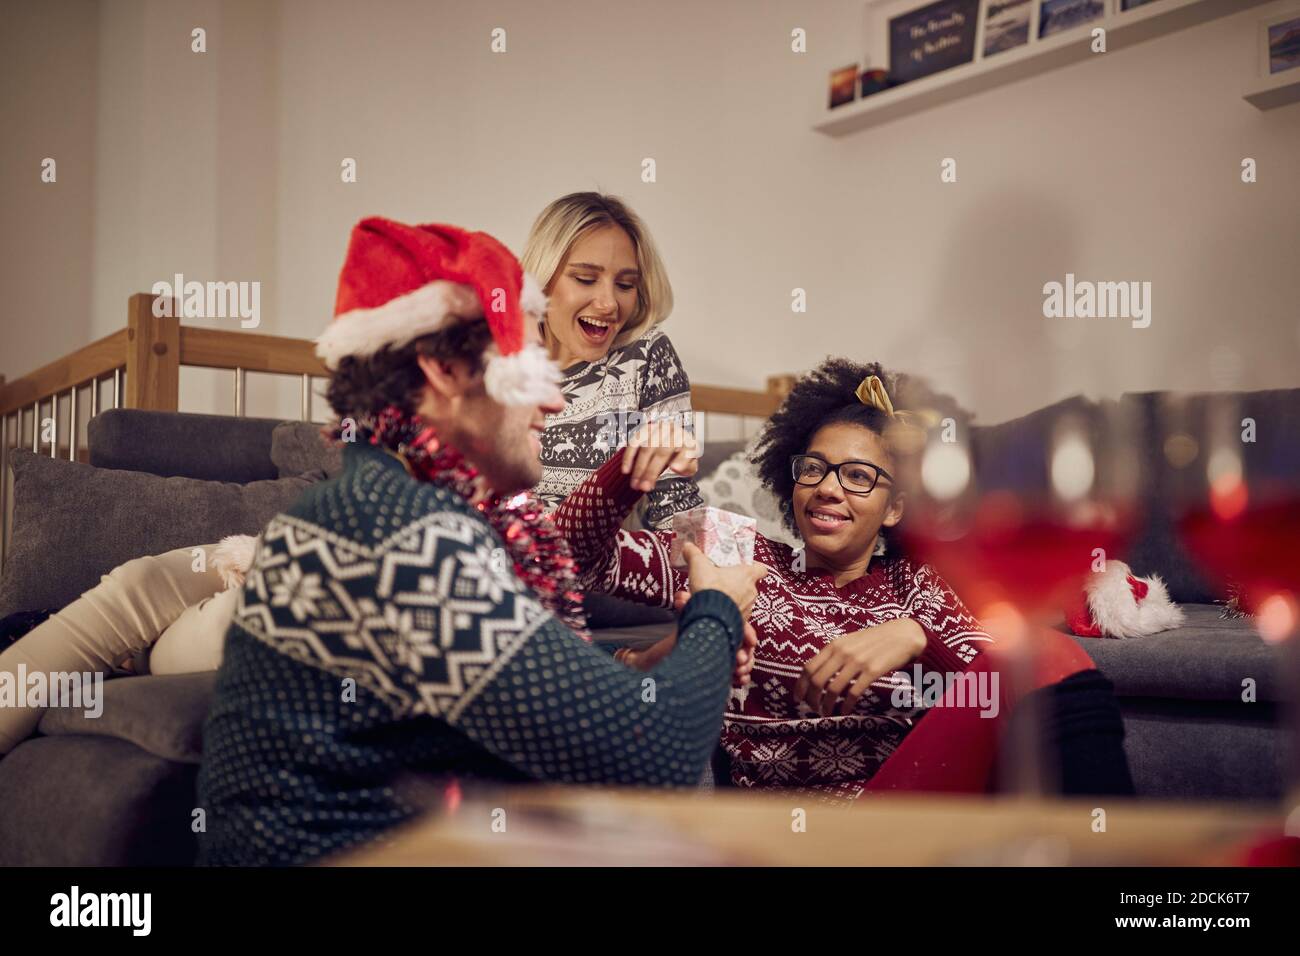 Group of friends celebrating New Year's Eve at home in relaxed atmosphere. Xmas, New Year, friends, celebration Stock Photo